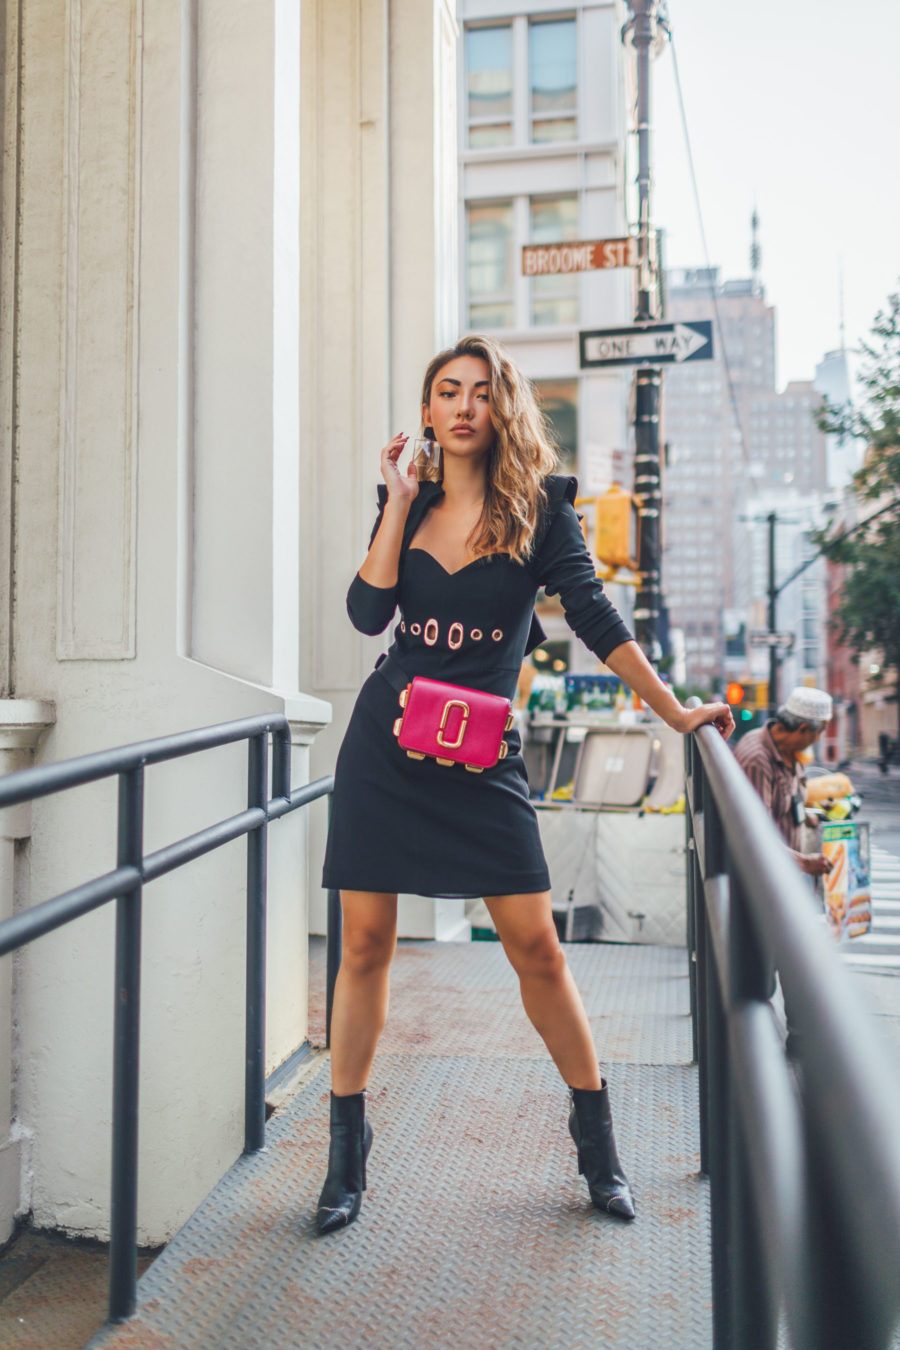 Gucci Belt Bag Outfit: 5 Ways To Style For A Chic And Trendy Look